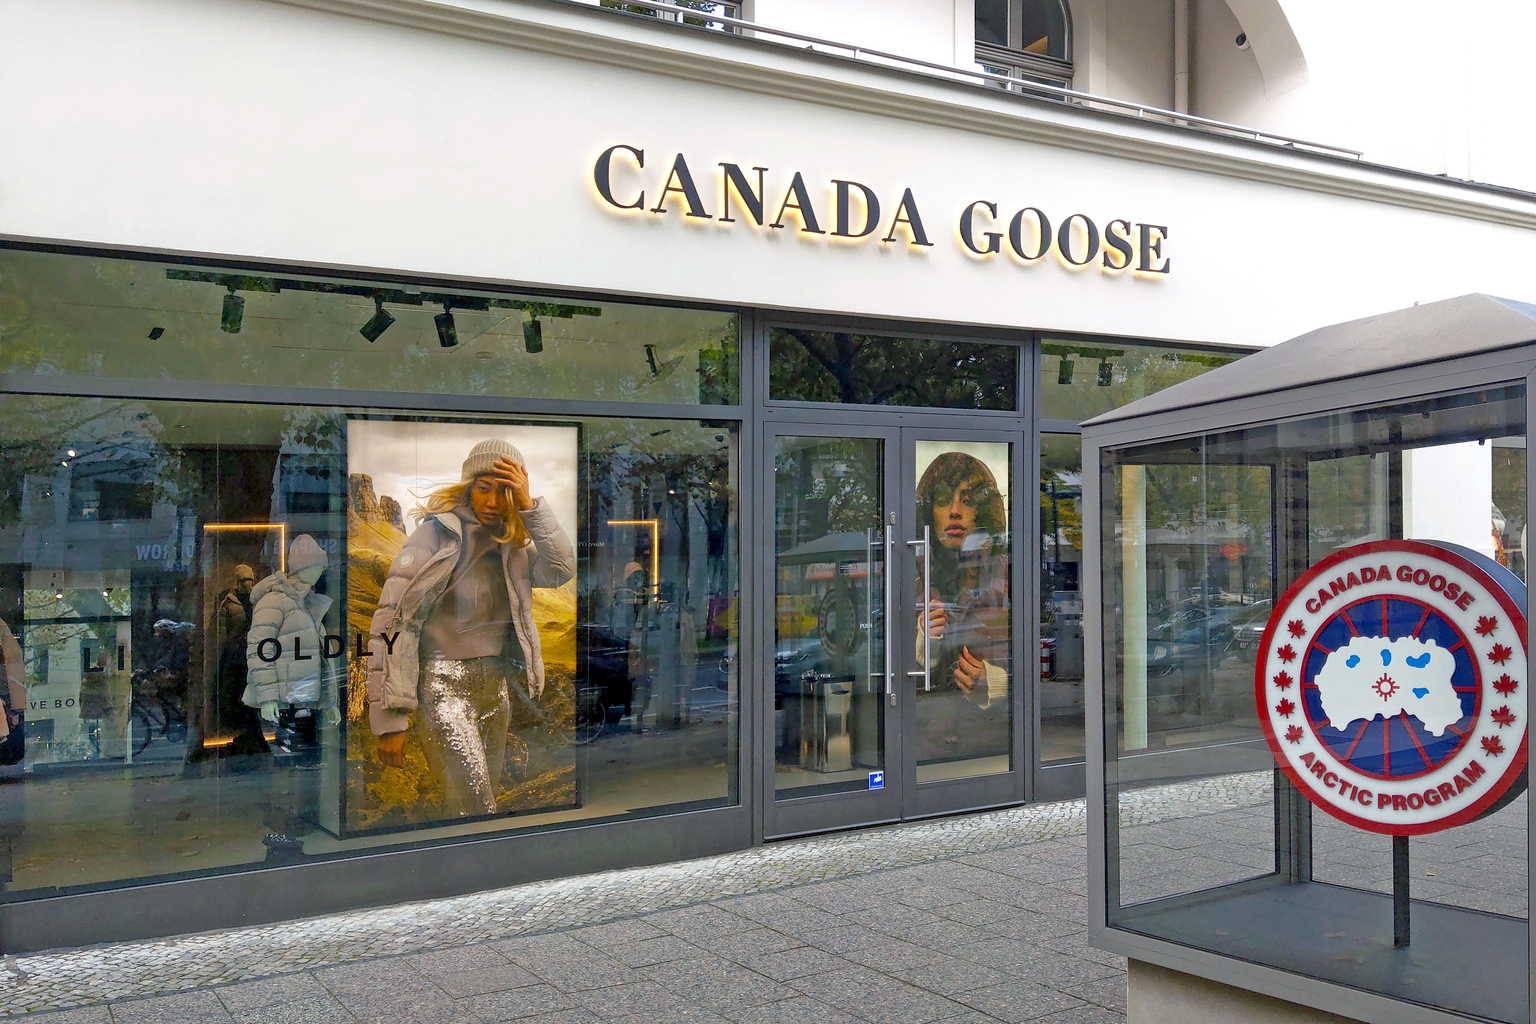 Canada Goose rallies after boosting sales guidance